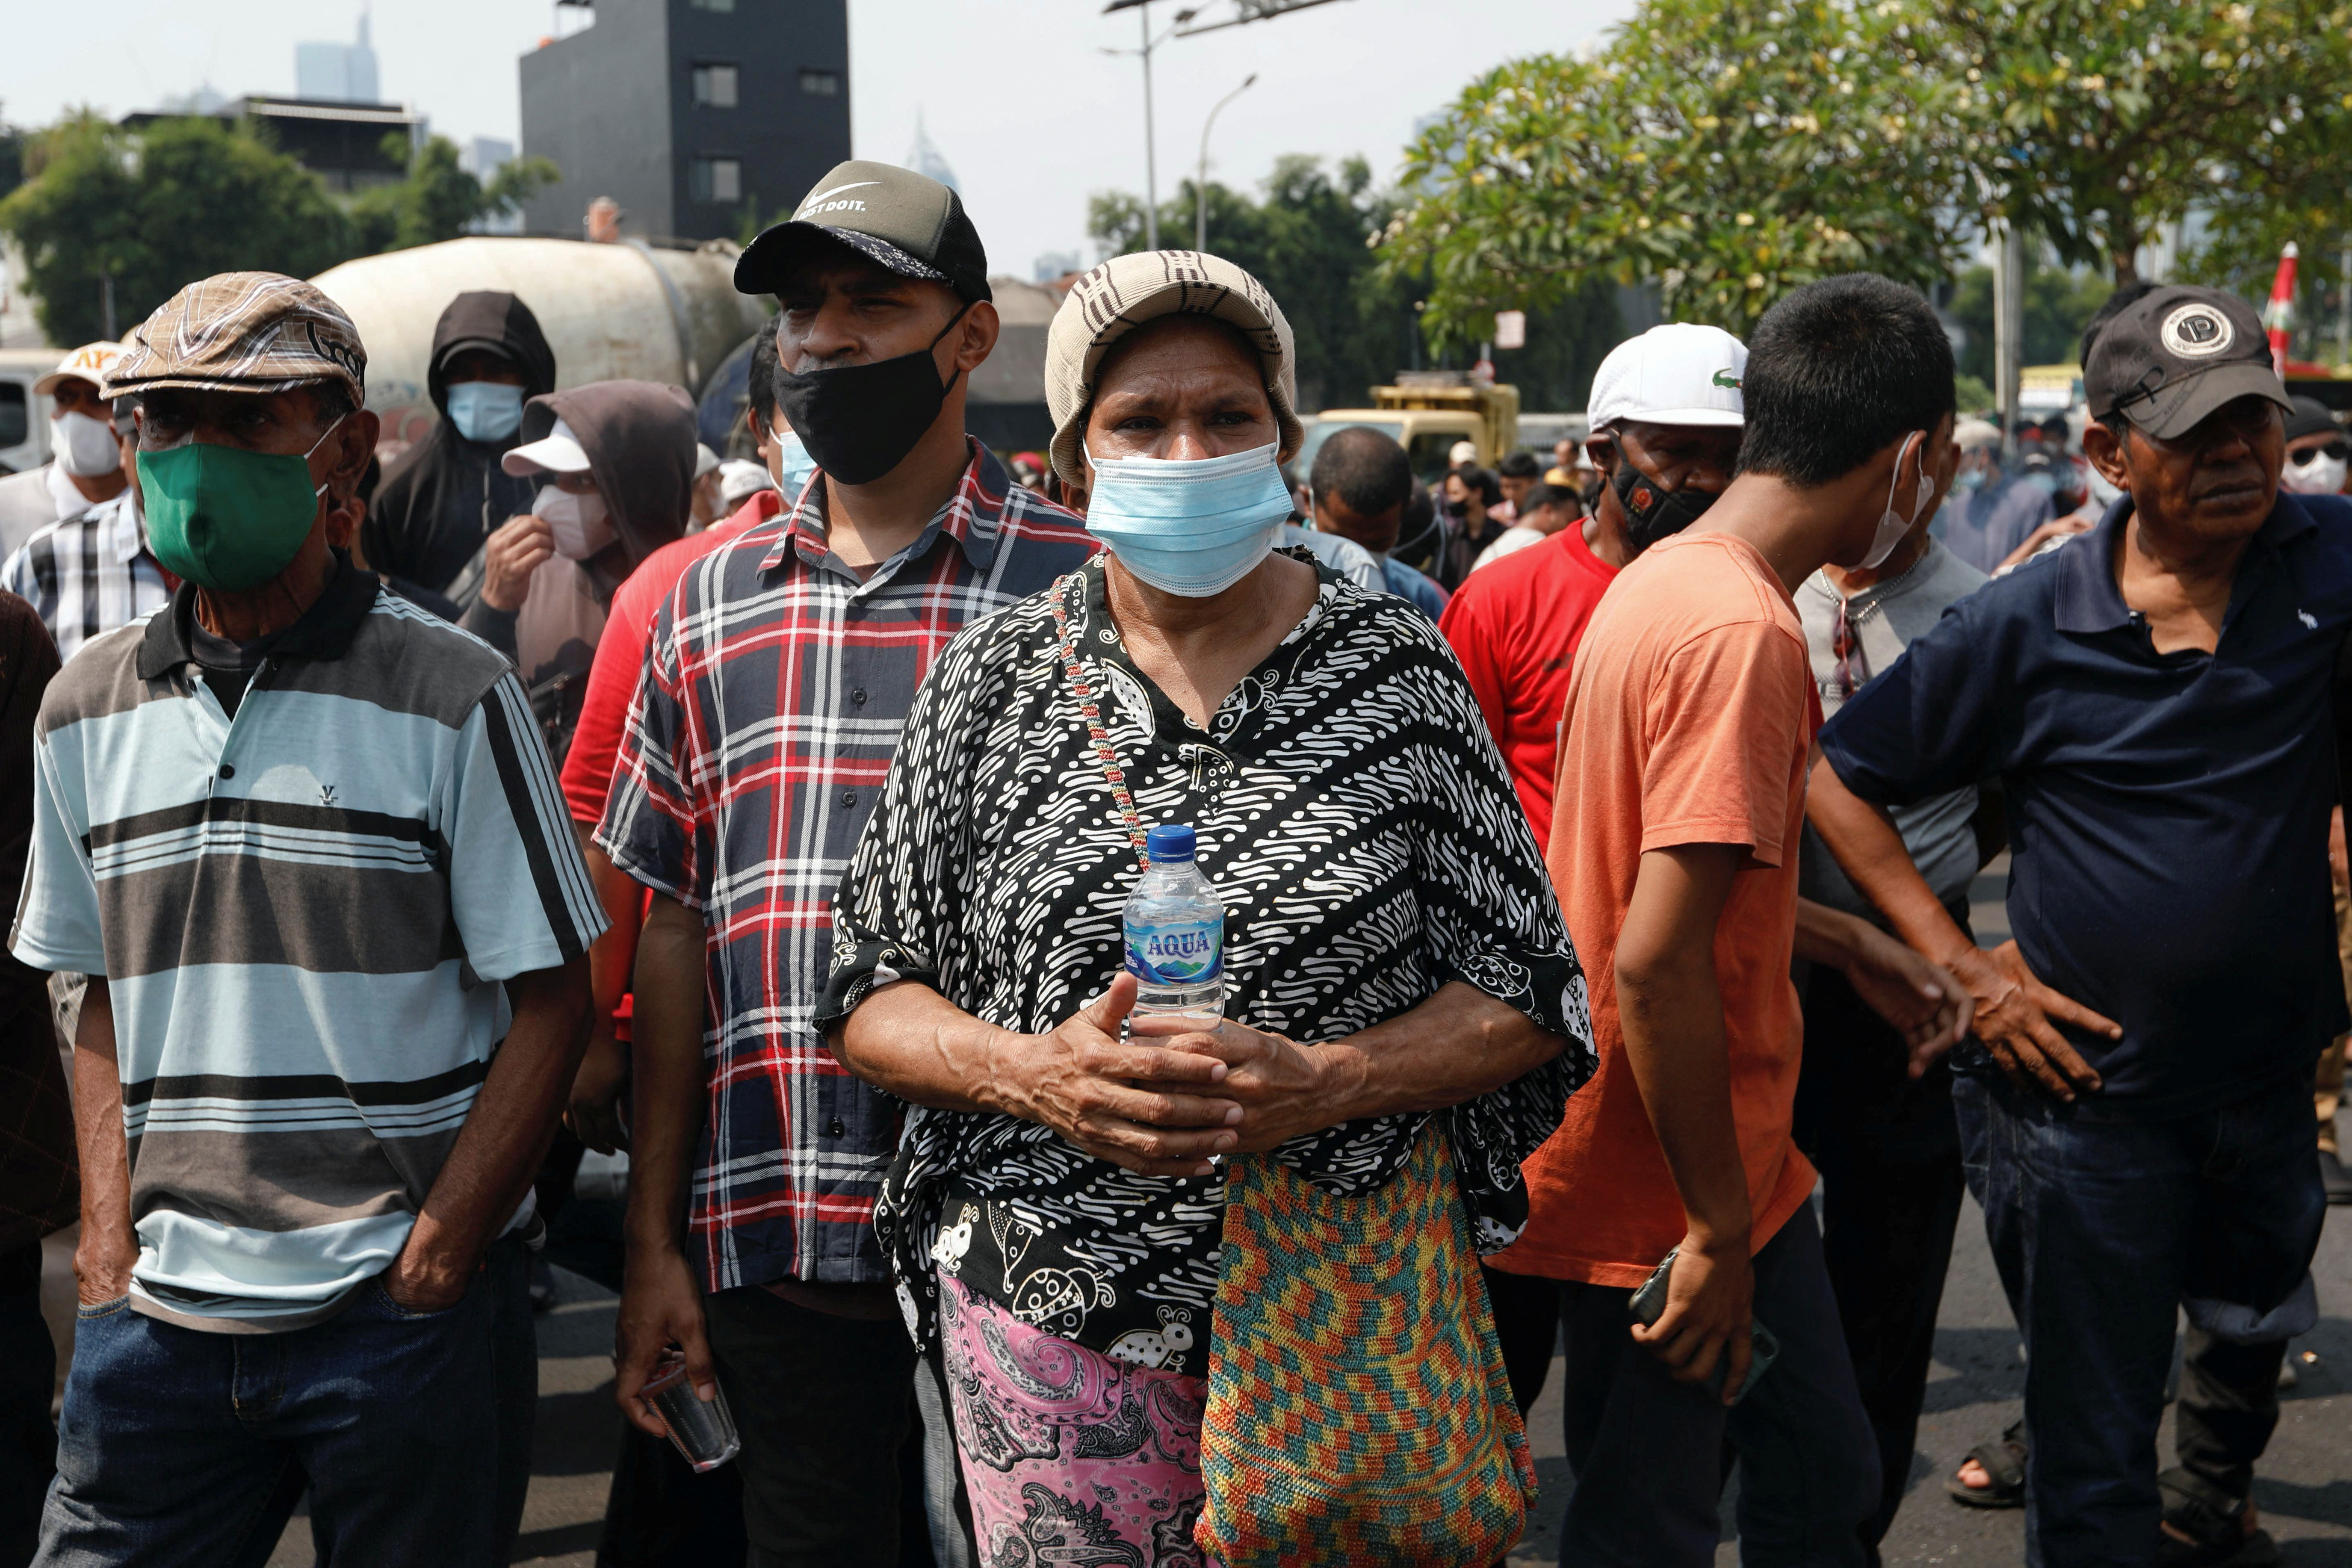 Demonstrators protest outside the Indonesian Parliament following a bill passed by legislators to create three new provinces in its underdeveloped region of Papua, in Jakarta